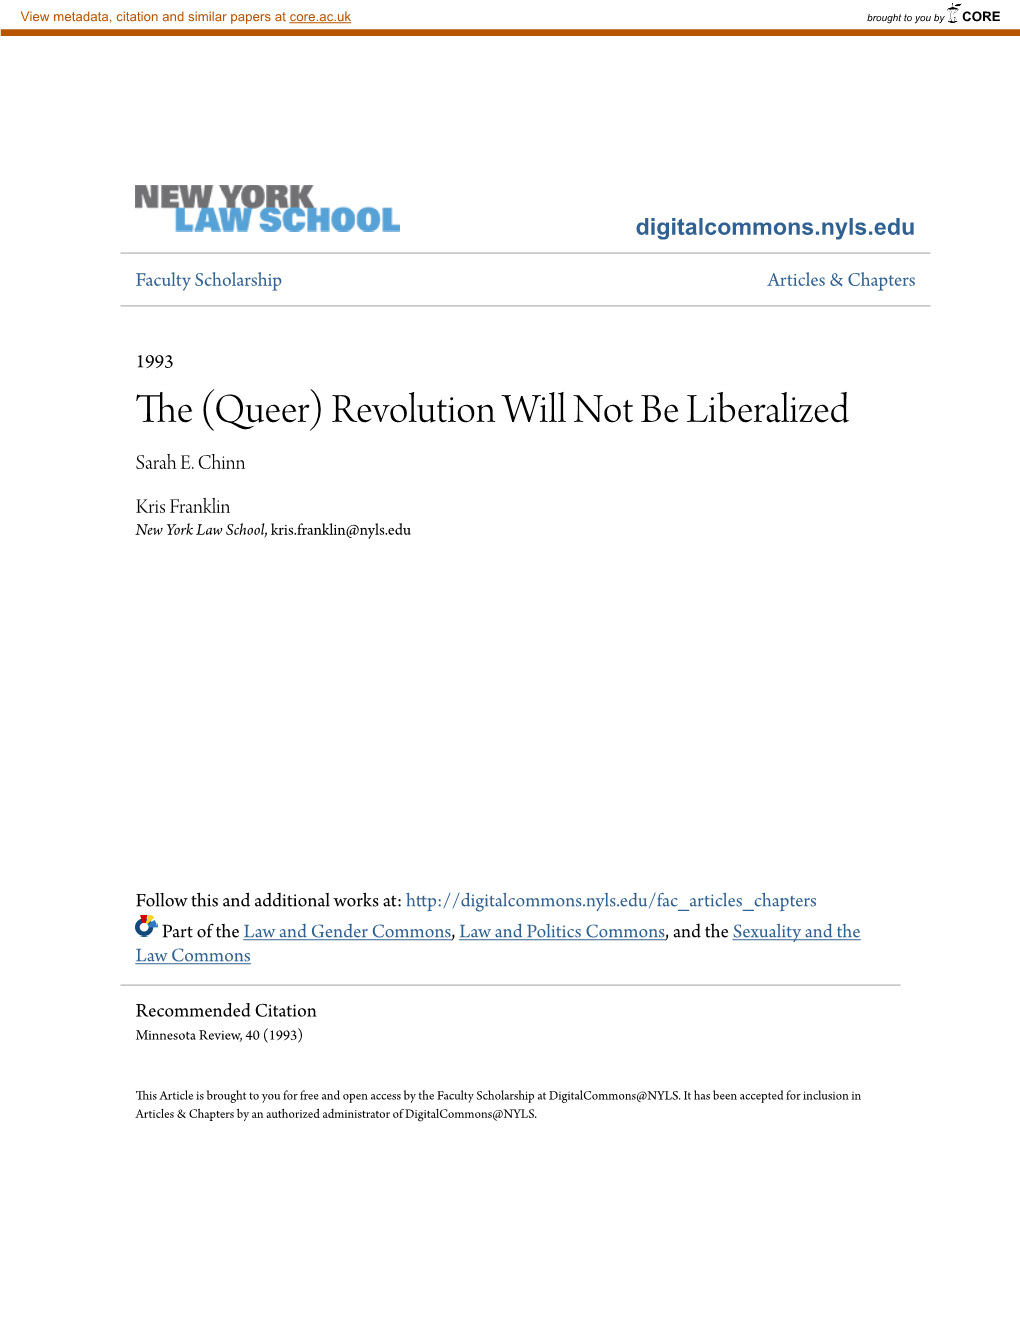 Queer) Revolution Will Not Be Liberalized